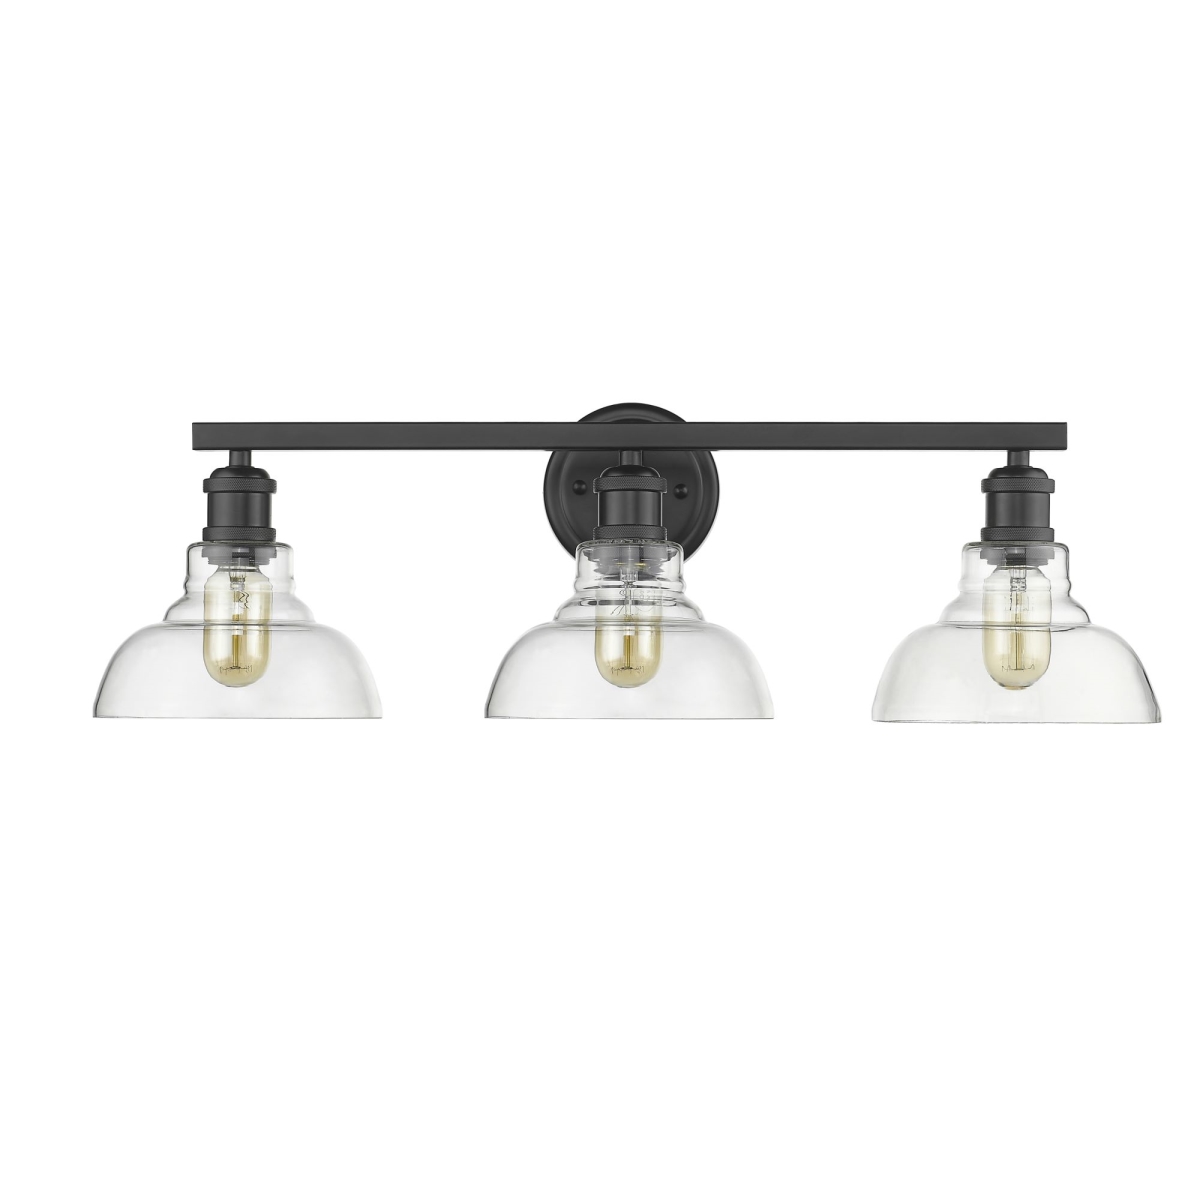 Picture of Golden Lighting 0305-BA3 BLK-CLR 28 in. Carver 3 Lights Black Bath Fixture Wall Light with Clear Glass Shades